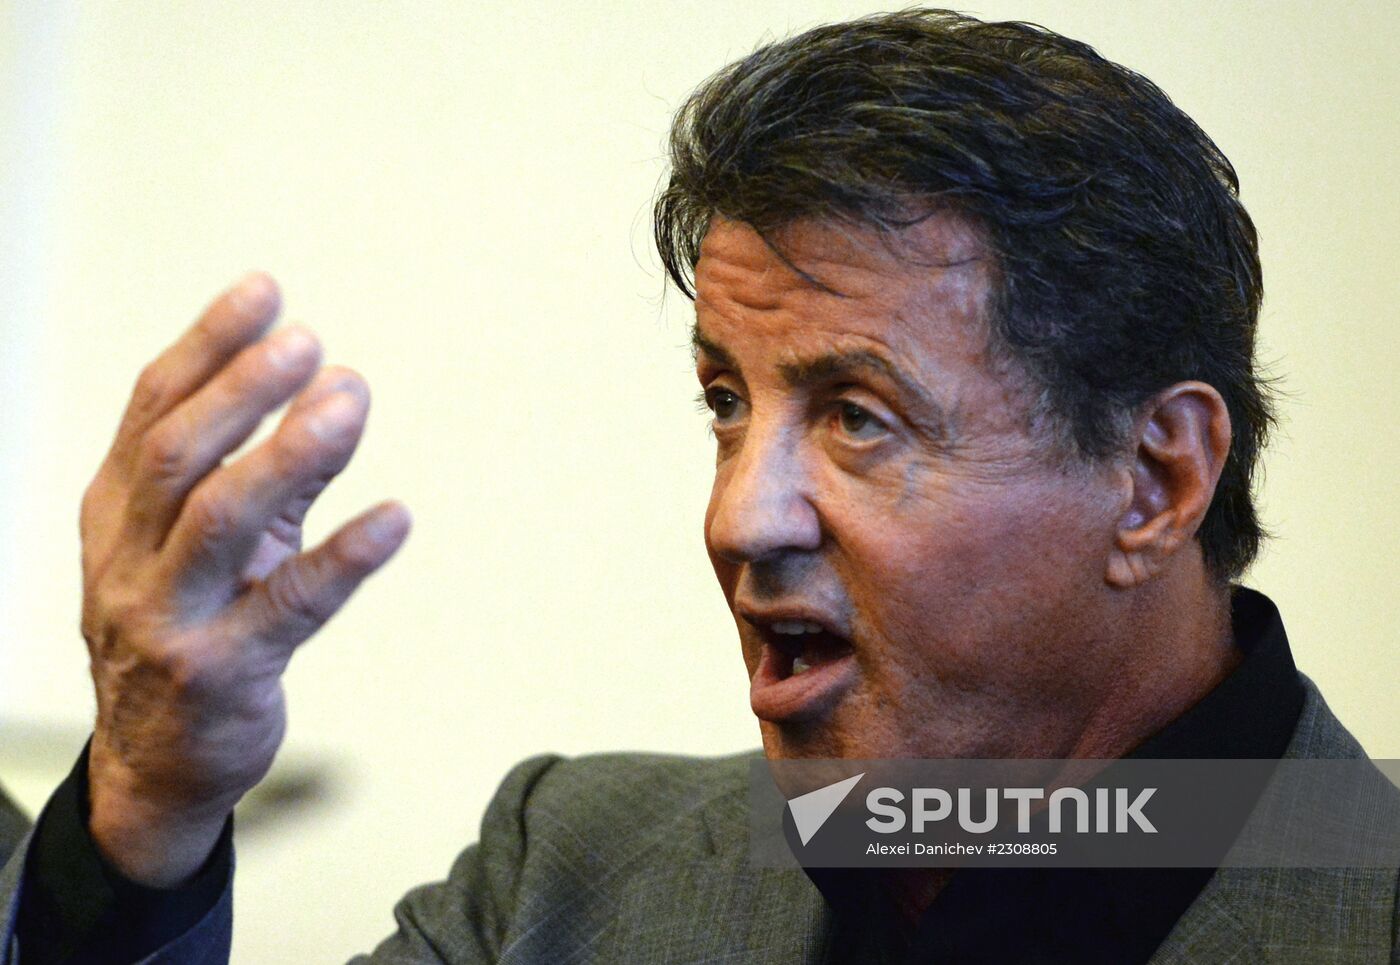 Exhibition of Sylvester Stallone's paintings opens at Russian Museum